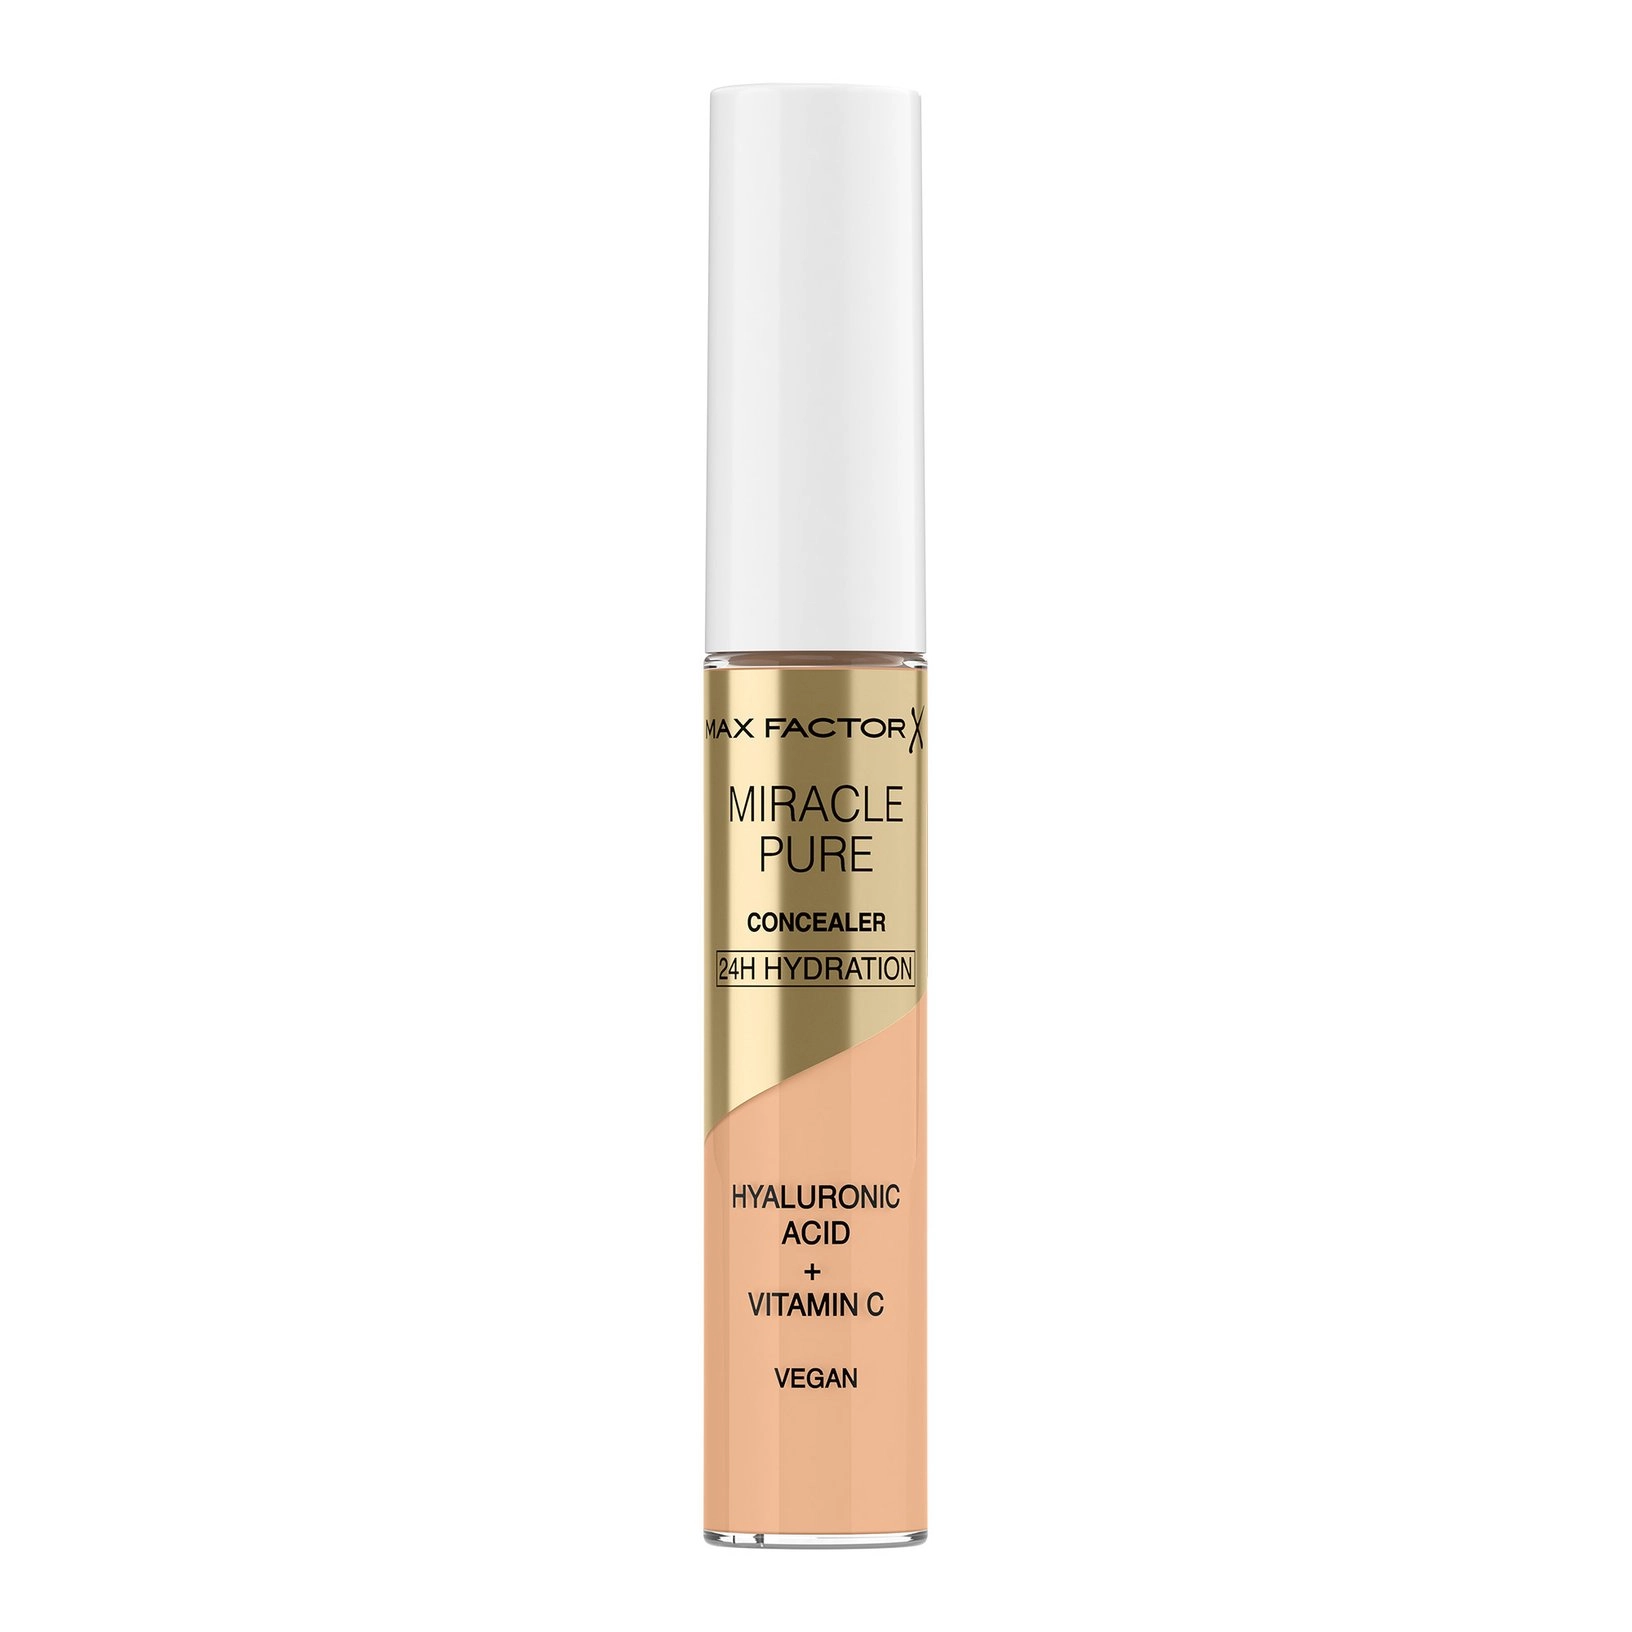 Image of Max Factor - Miracle Pure Concealer - 01